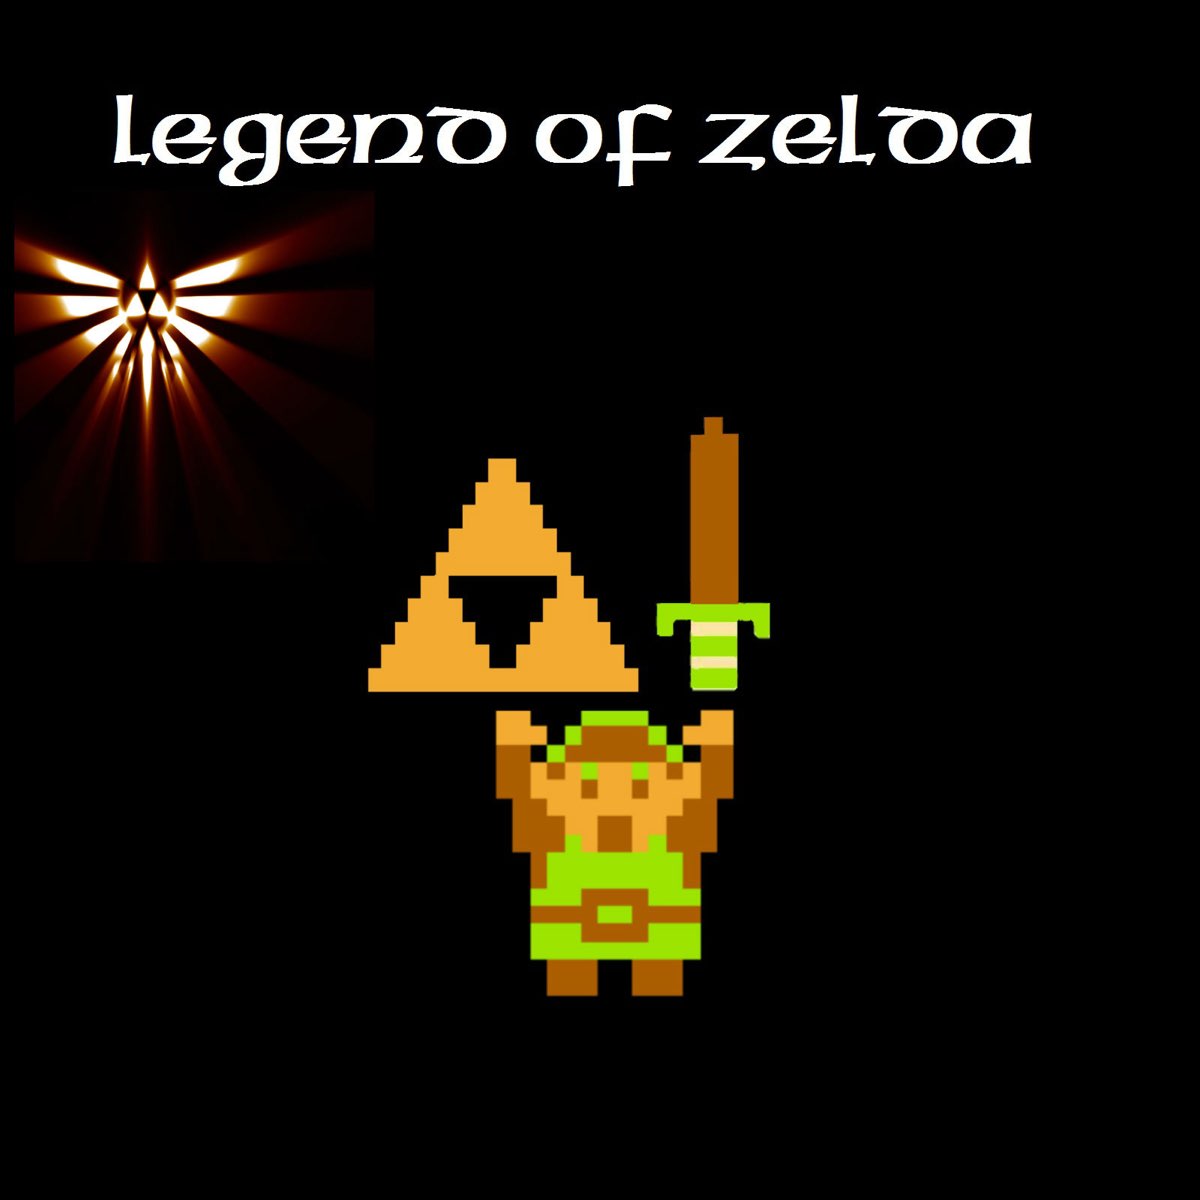 The Legend of Zelda: A Link To The Past OST [FULL] 